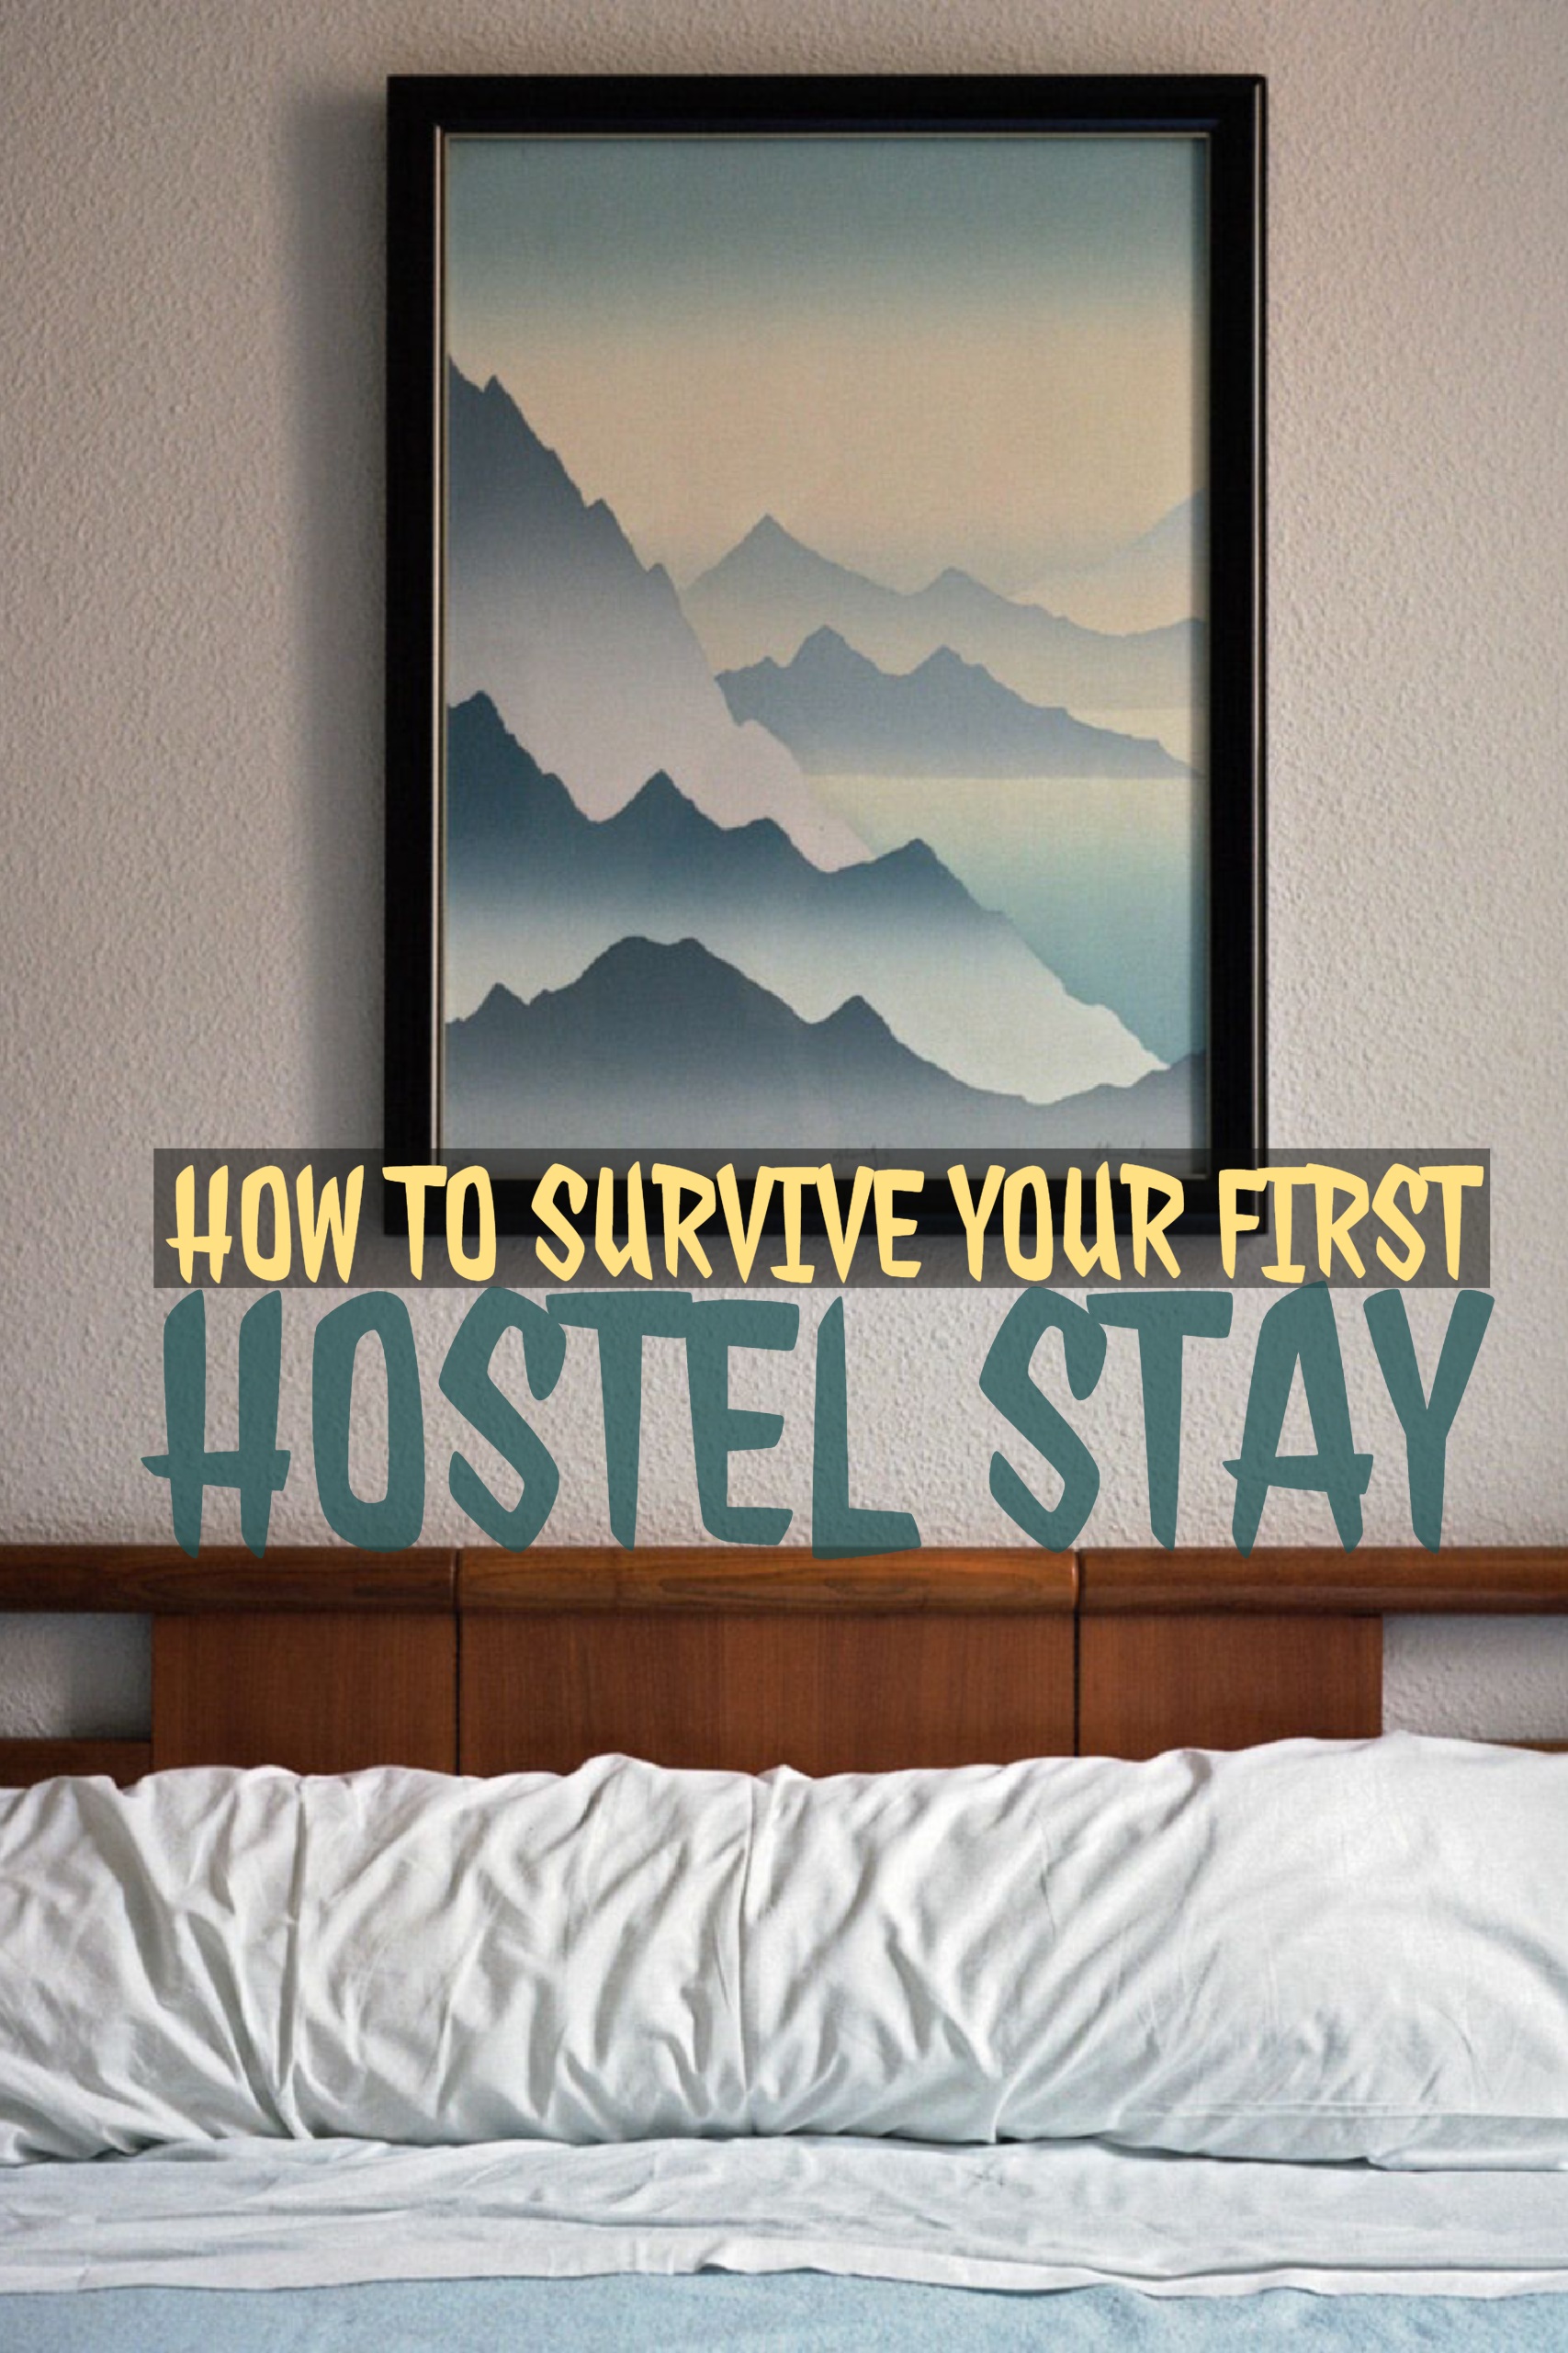 How to survive your first hostel stay according to Traveling Honeybird